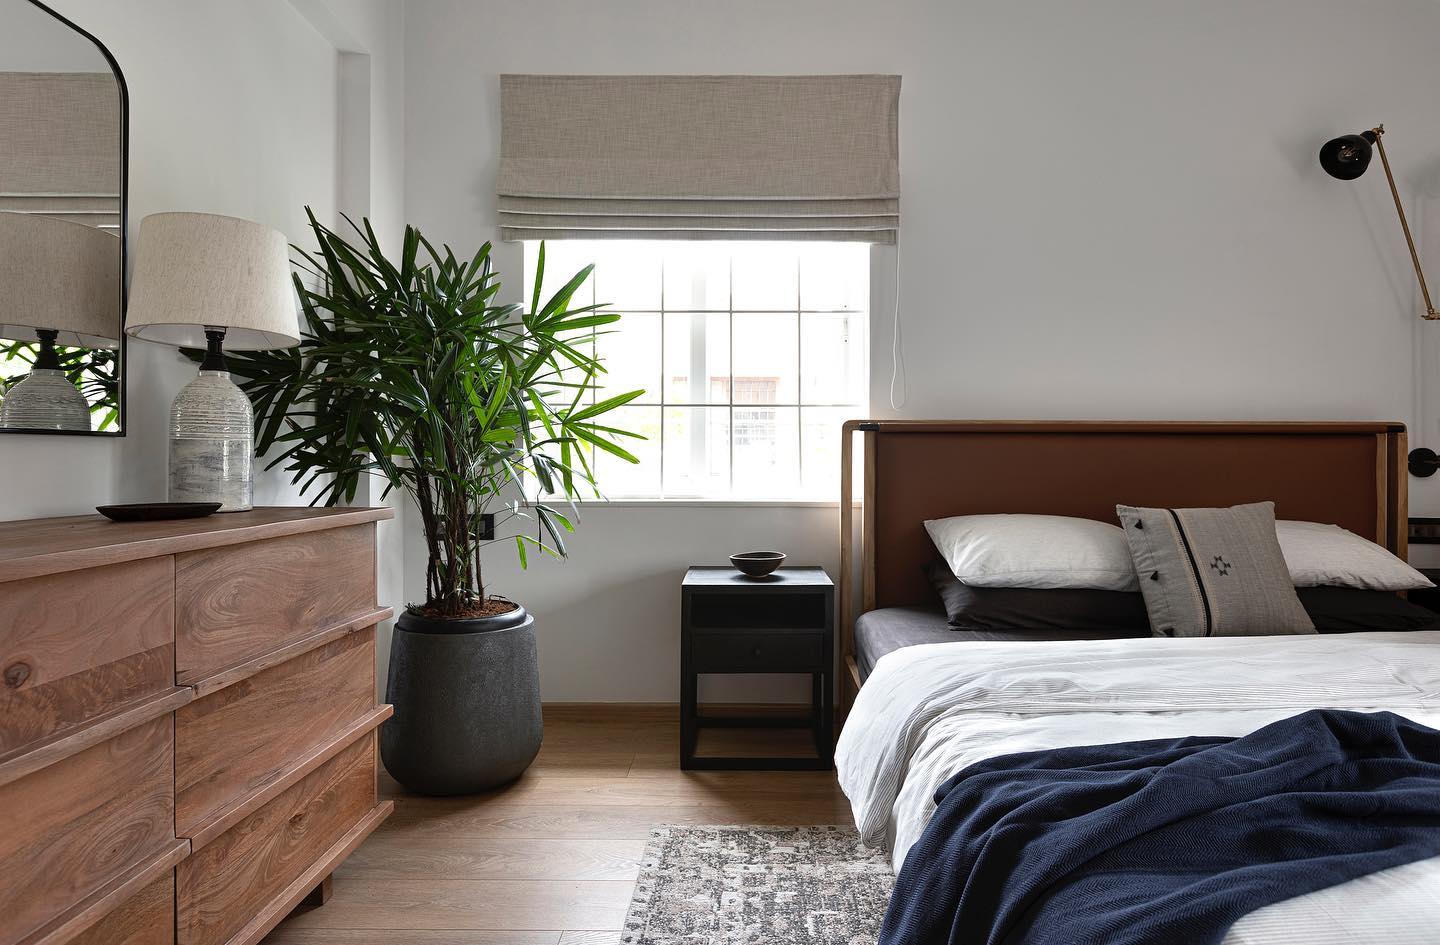 indoor plant in a black pot in a bedroom with bed, rug, brown cabinet and a black table